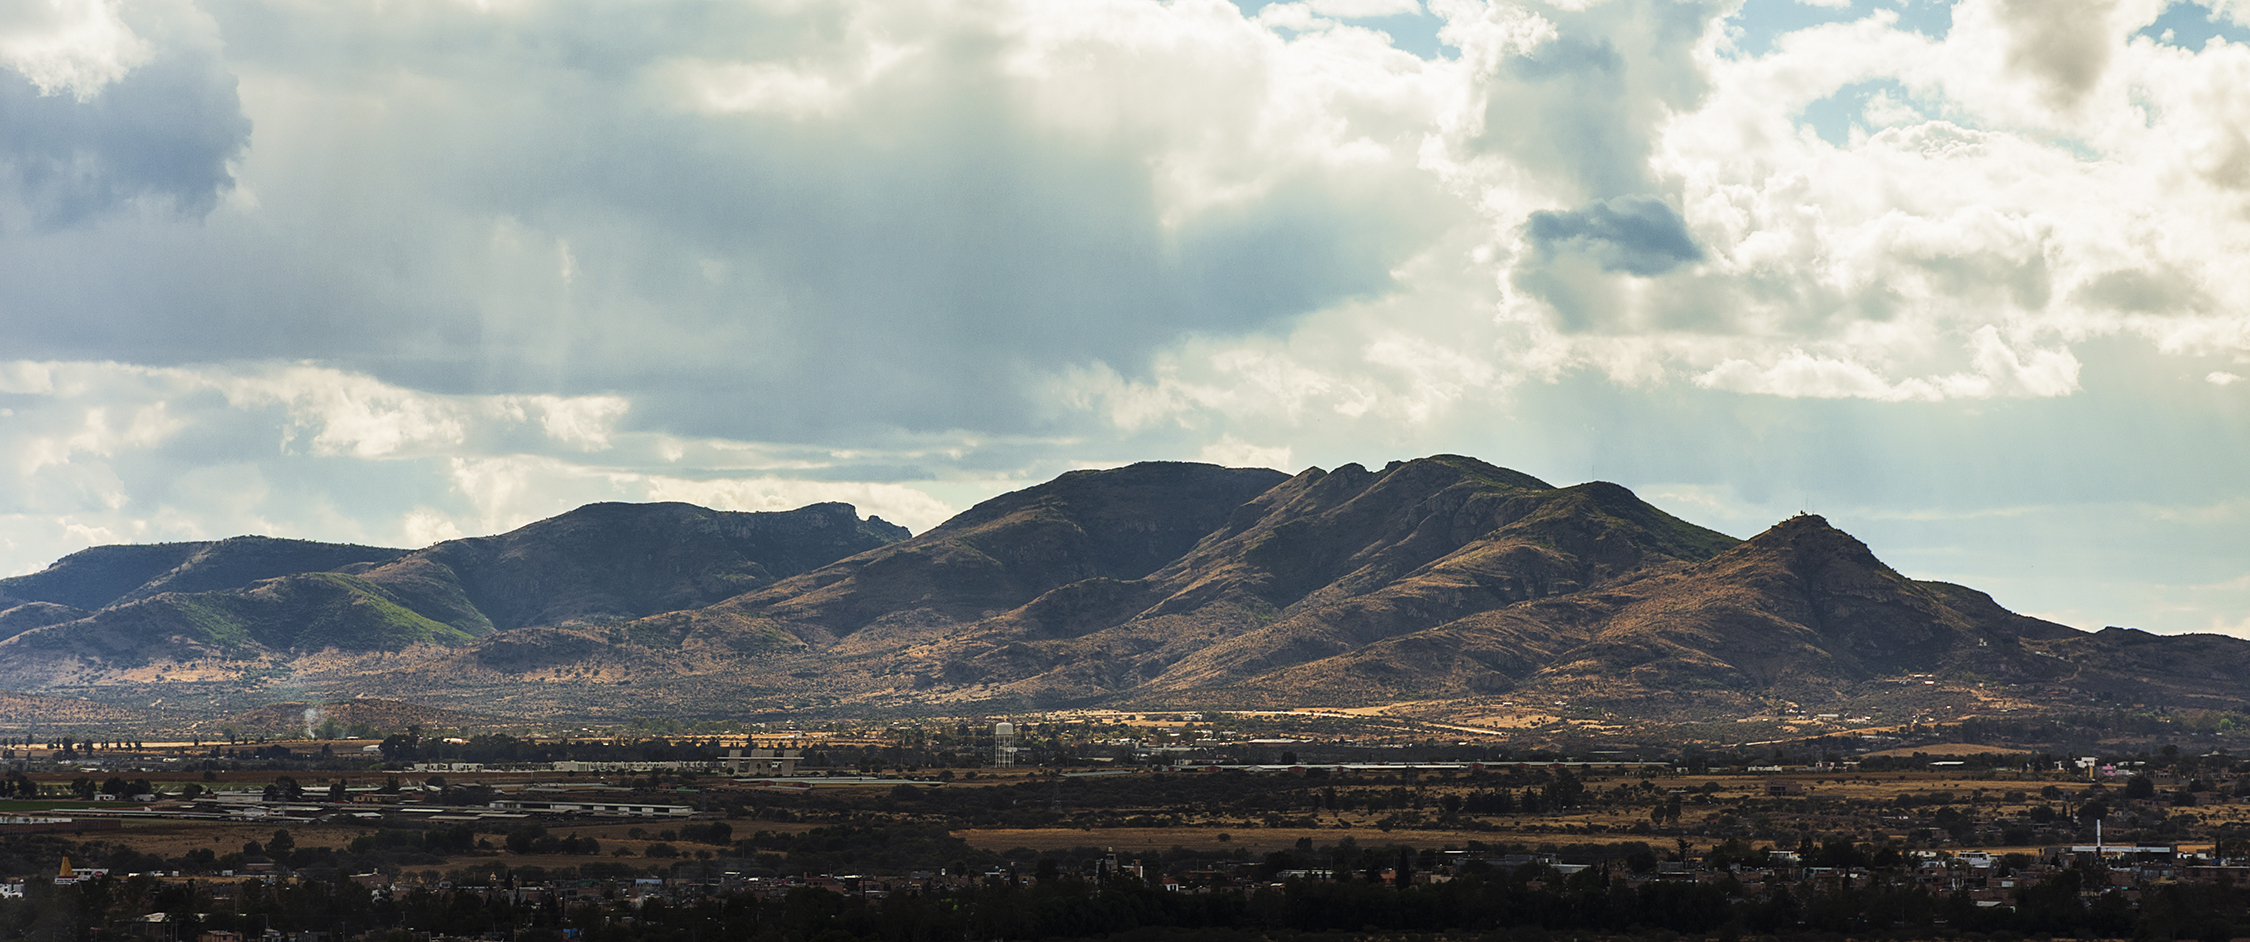 A photo of the landscape of central Mexico. The land in the foreground is flat. Behind, a range of mountains rises toward the clouds.